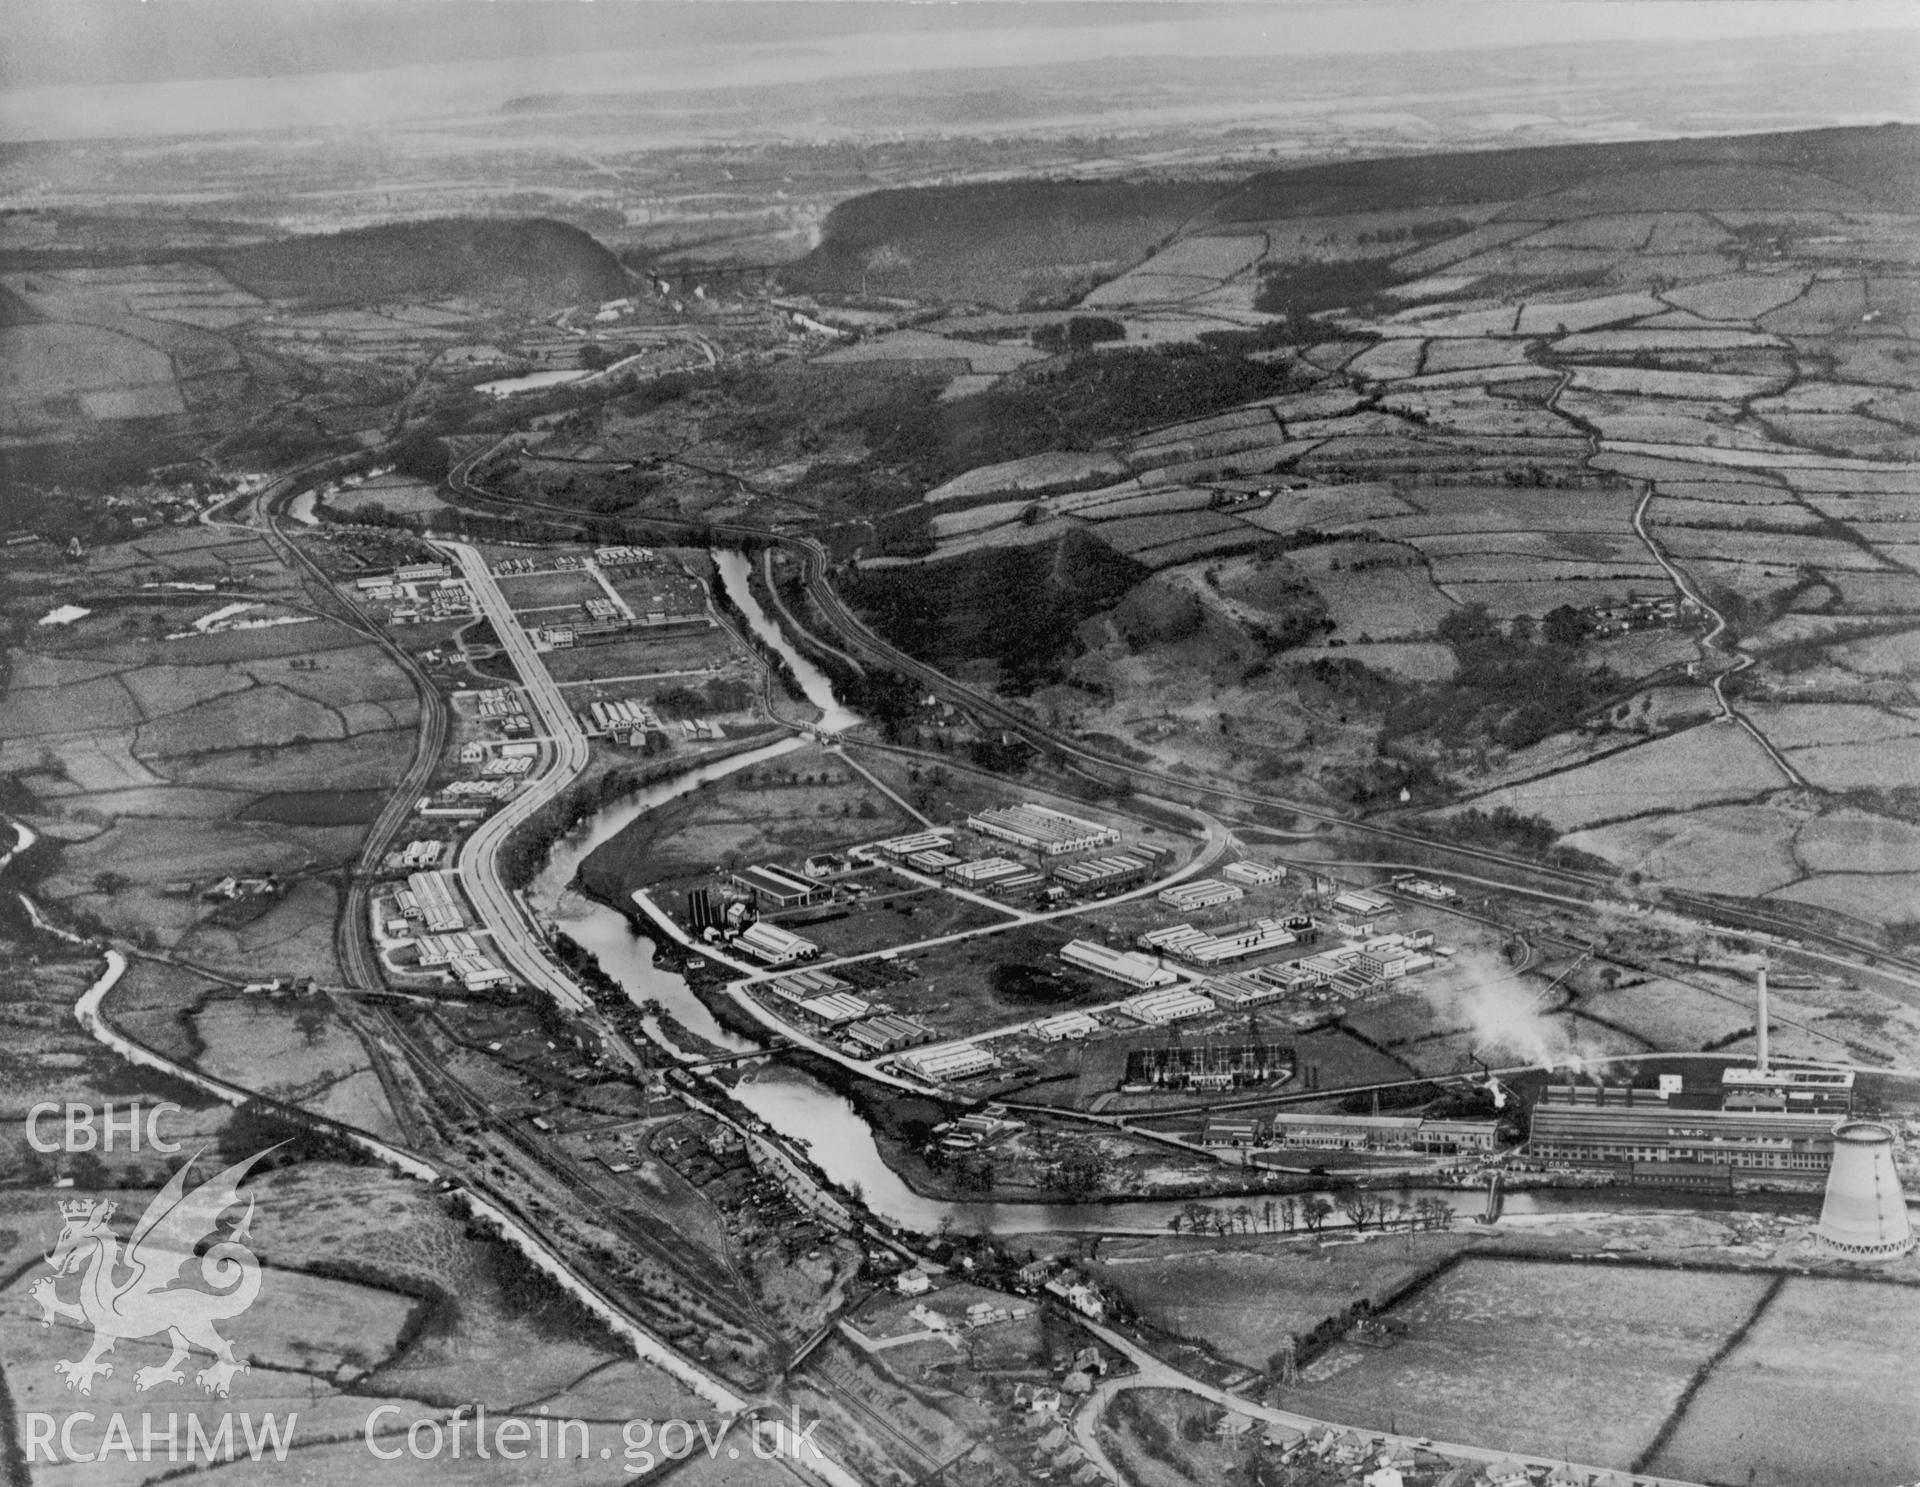 Black and white aerial photograph showing the Treforest Trading Estate development circa 1938-9 with the new A470 dual carriageway built through the site. Aerofilms album Glamorgan S-Z W(29)